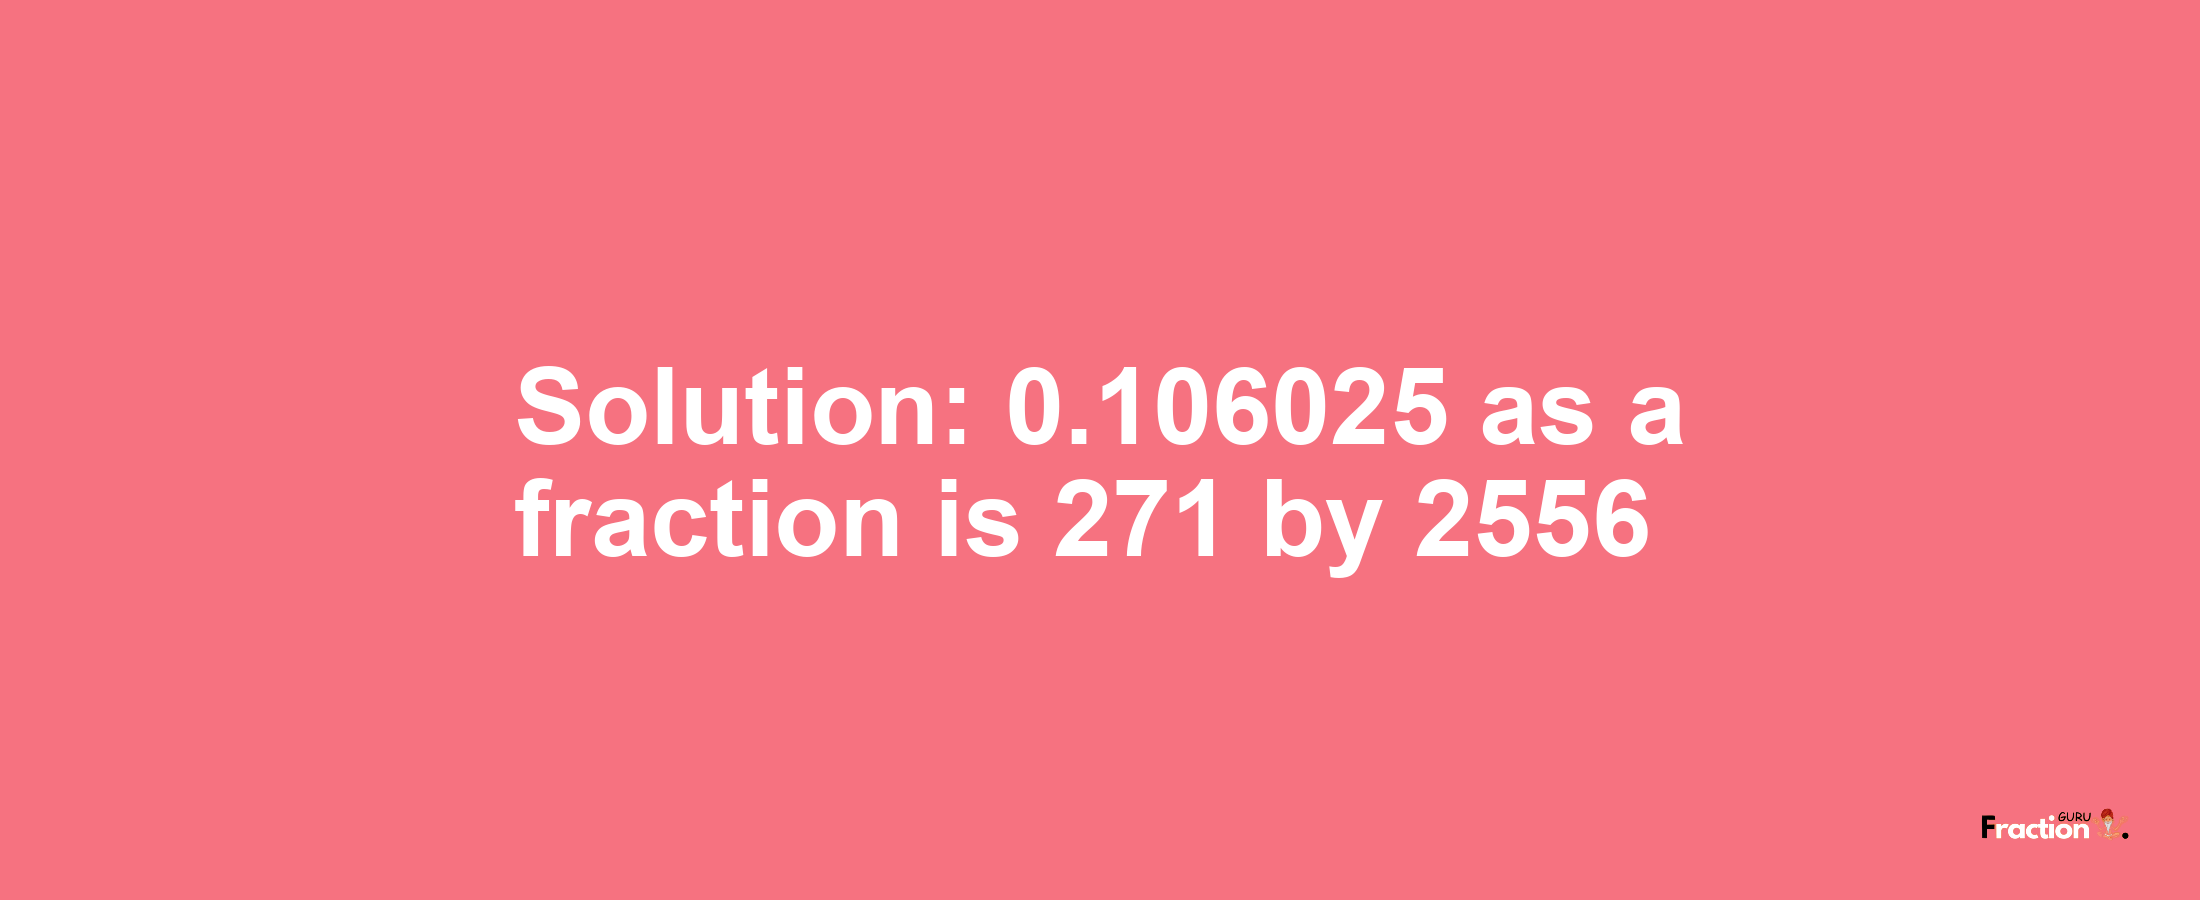 Solution:0.106025 as a fraction is 271/2556